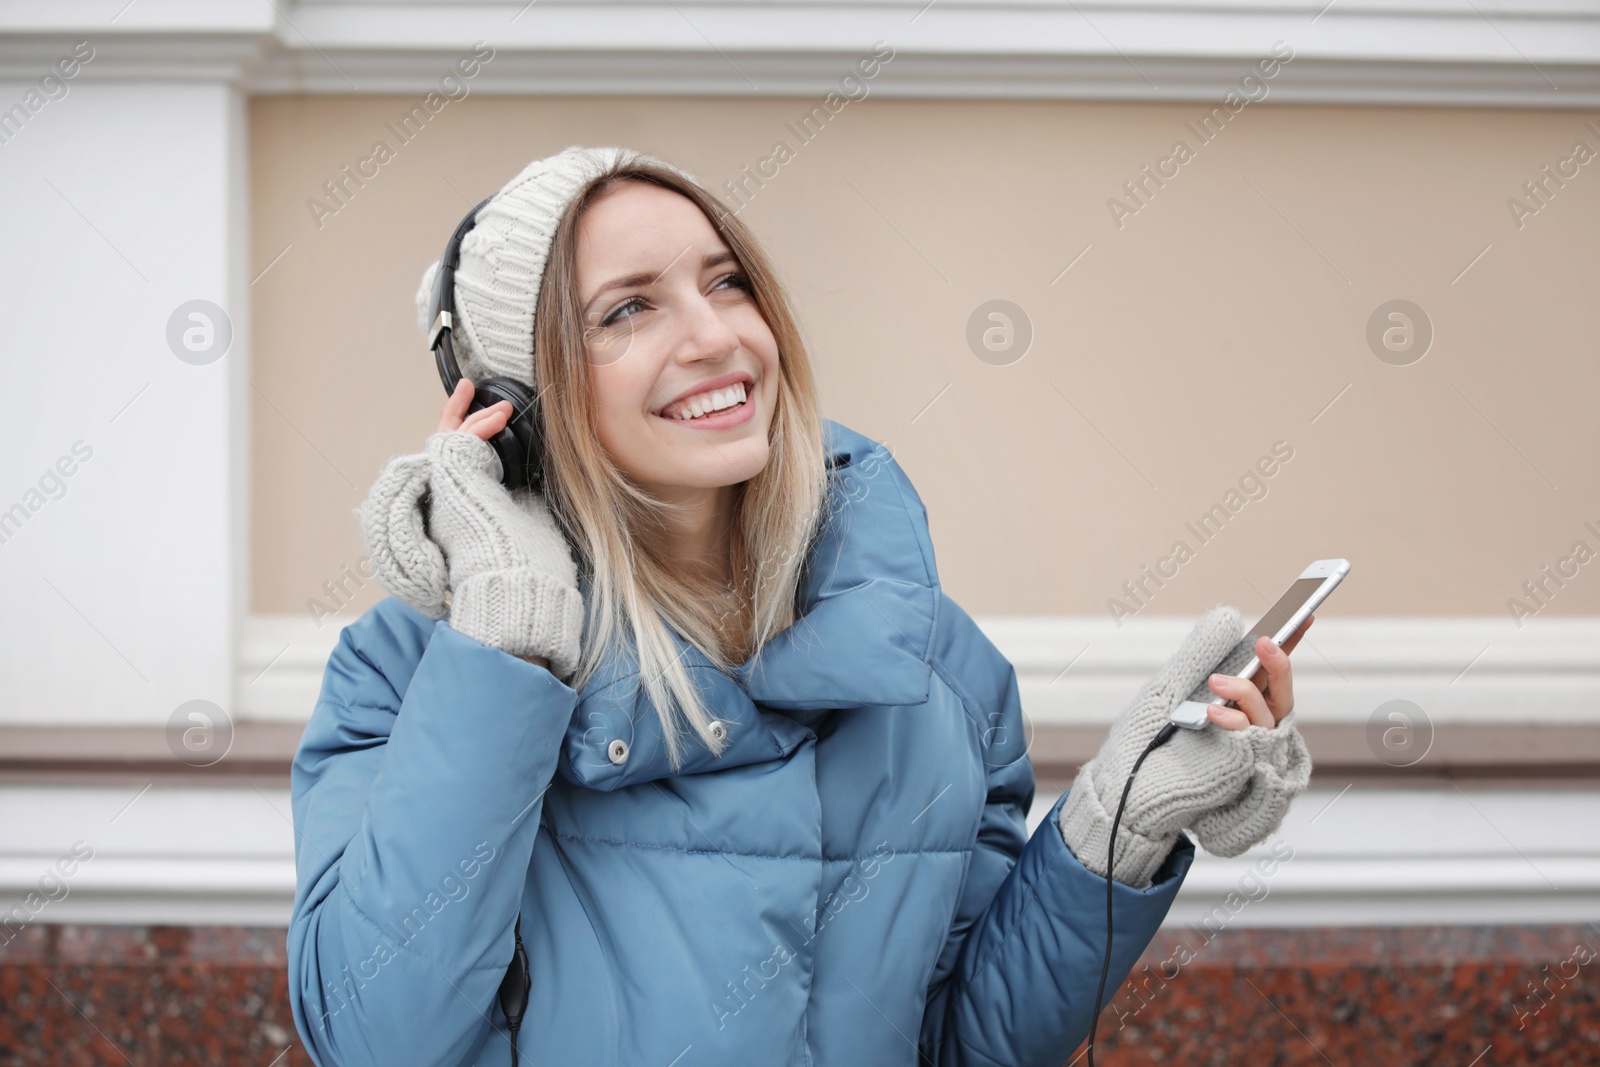 Photo of Young woman with headphones listening to music near light wall